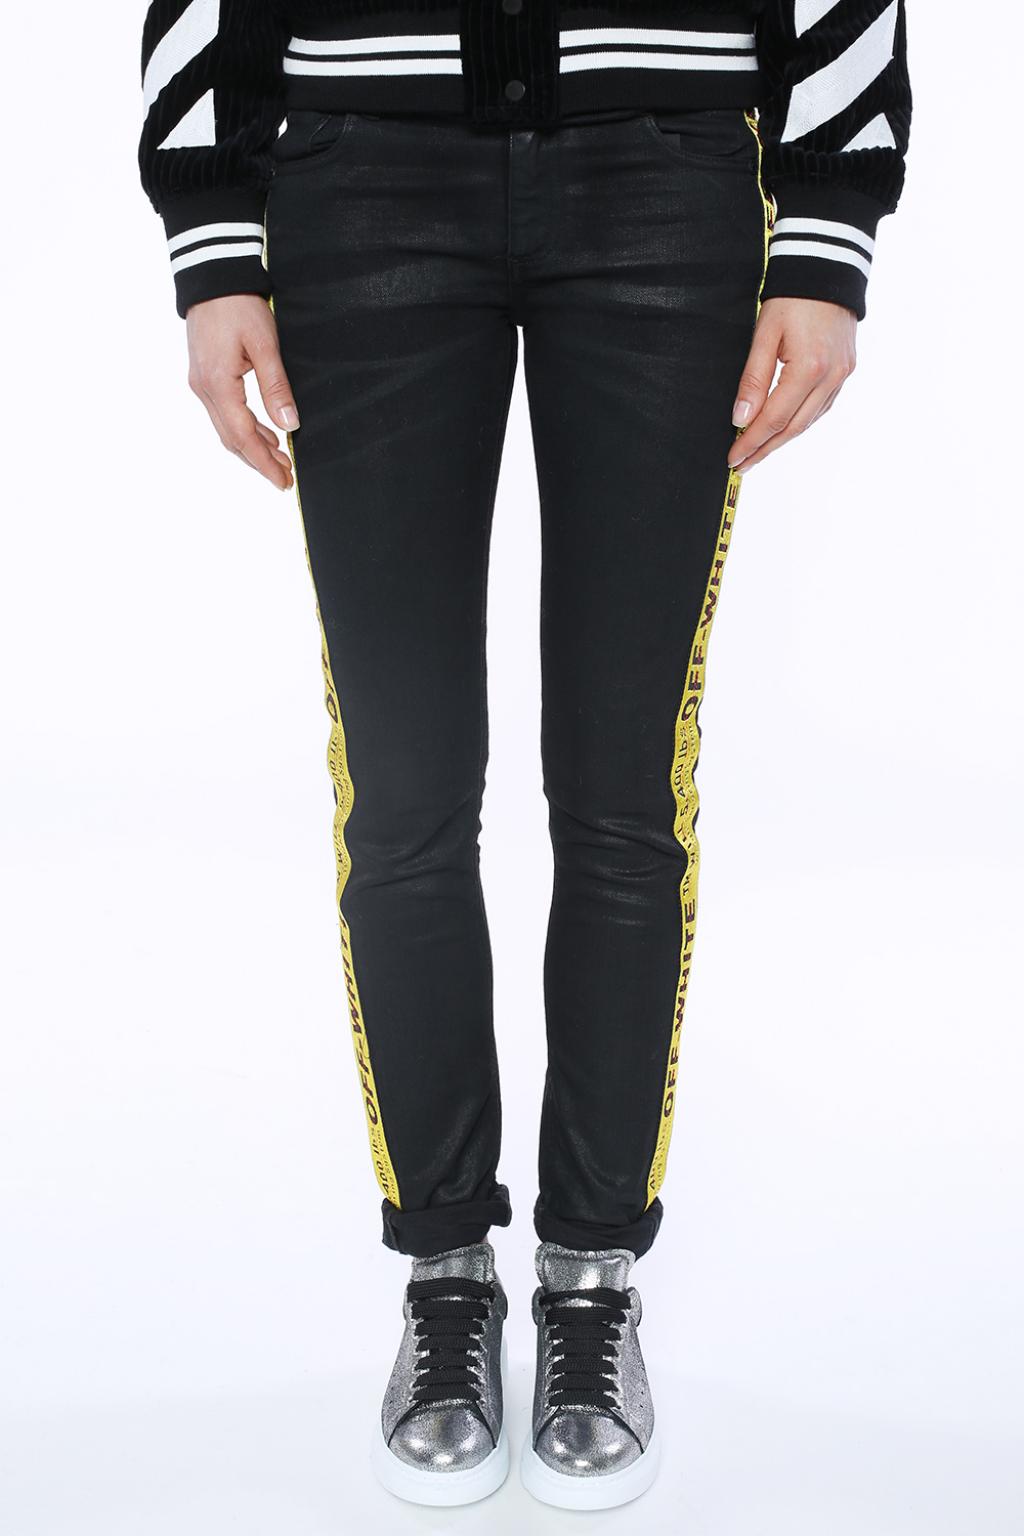 black jeans with white side stripe